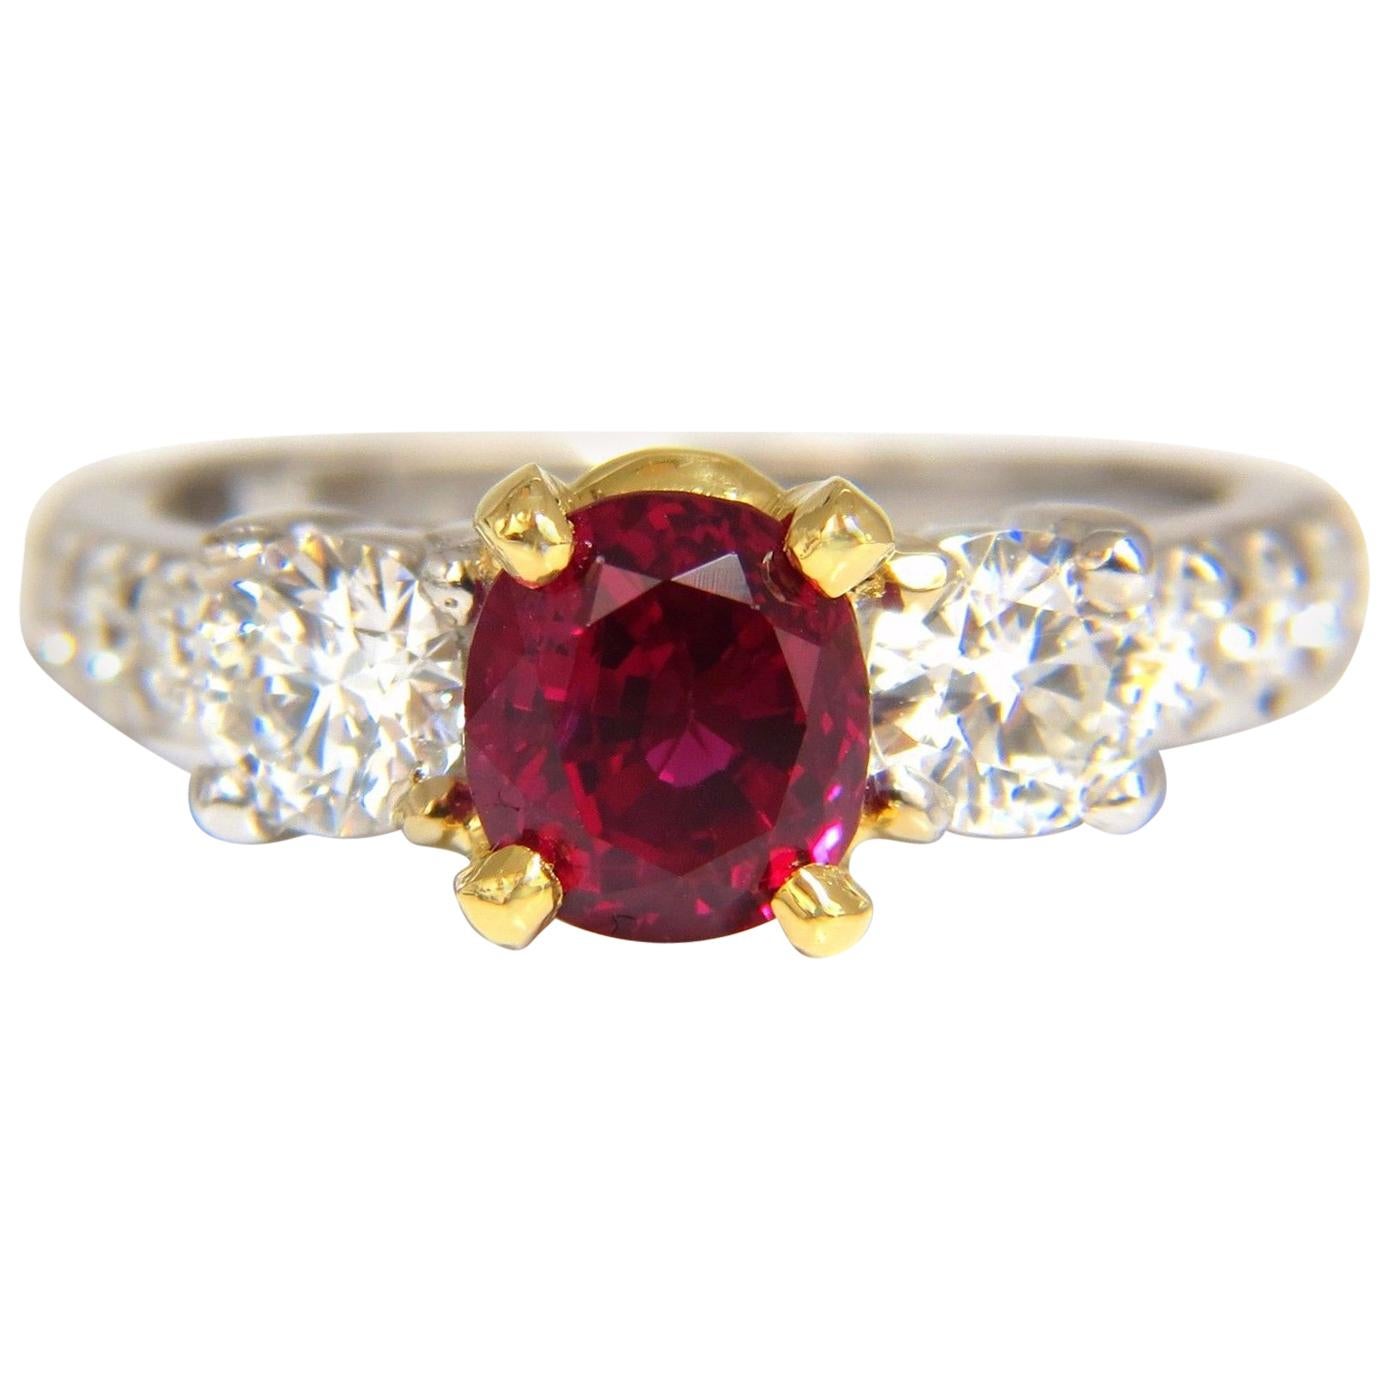 GIA Certified 1.83ct oval cut "pigeons blood" red ruby 1.02ct diamonds ring 18kt